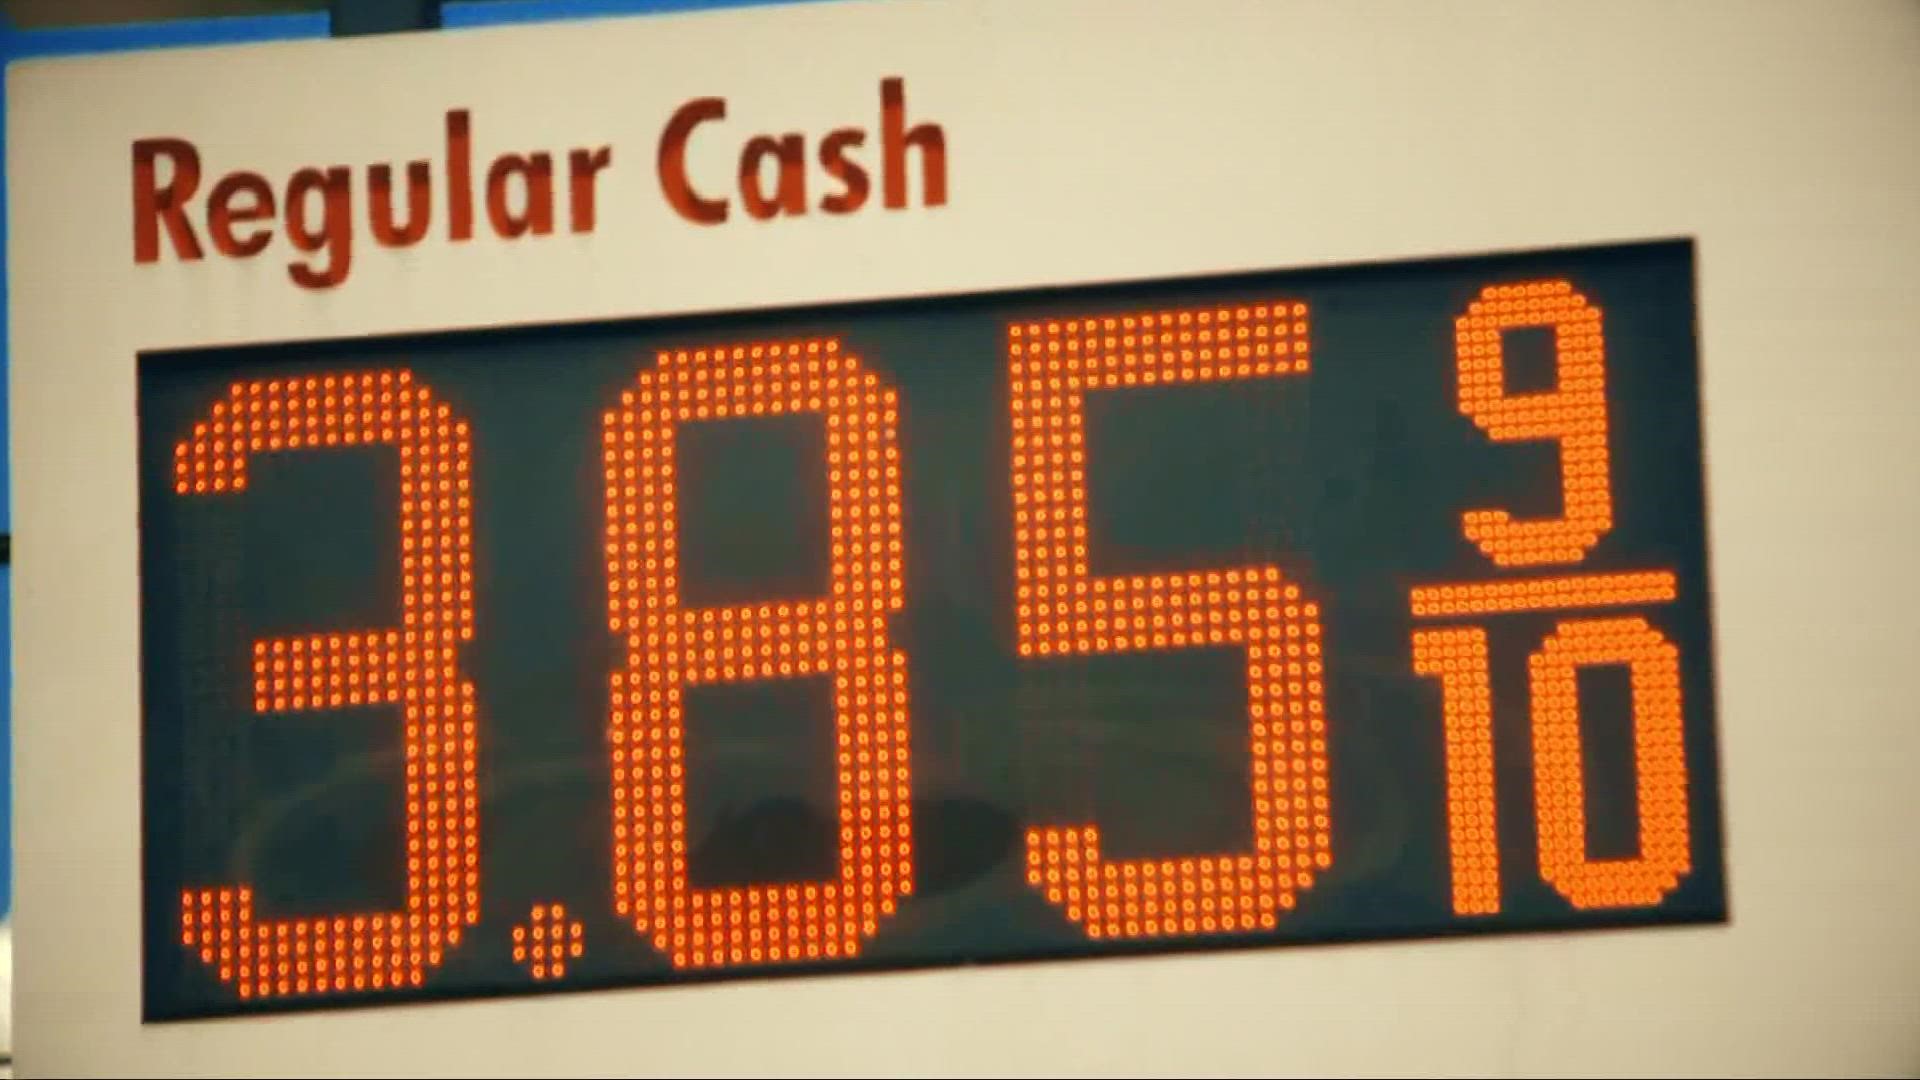 Drivers are seeing some relief at the pump, with the average price per gallon in Ohio dropping nearly $1.30 since June and the national average dropping below $4.